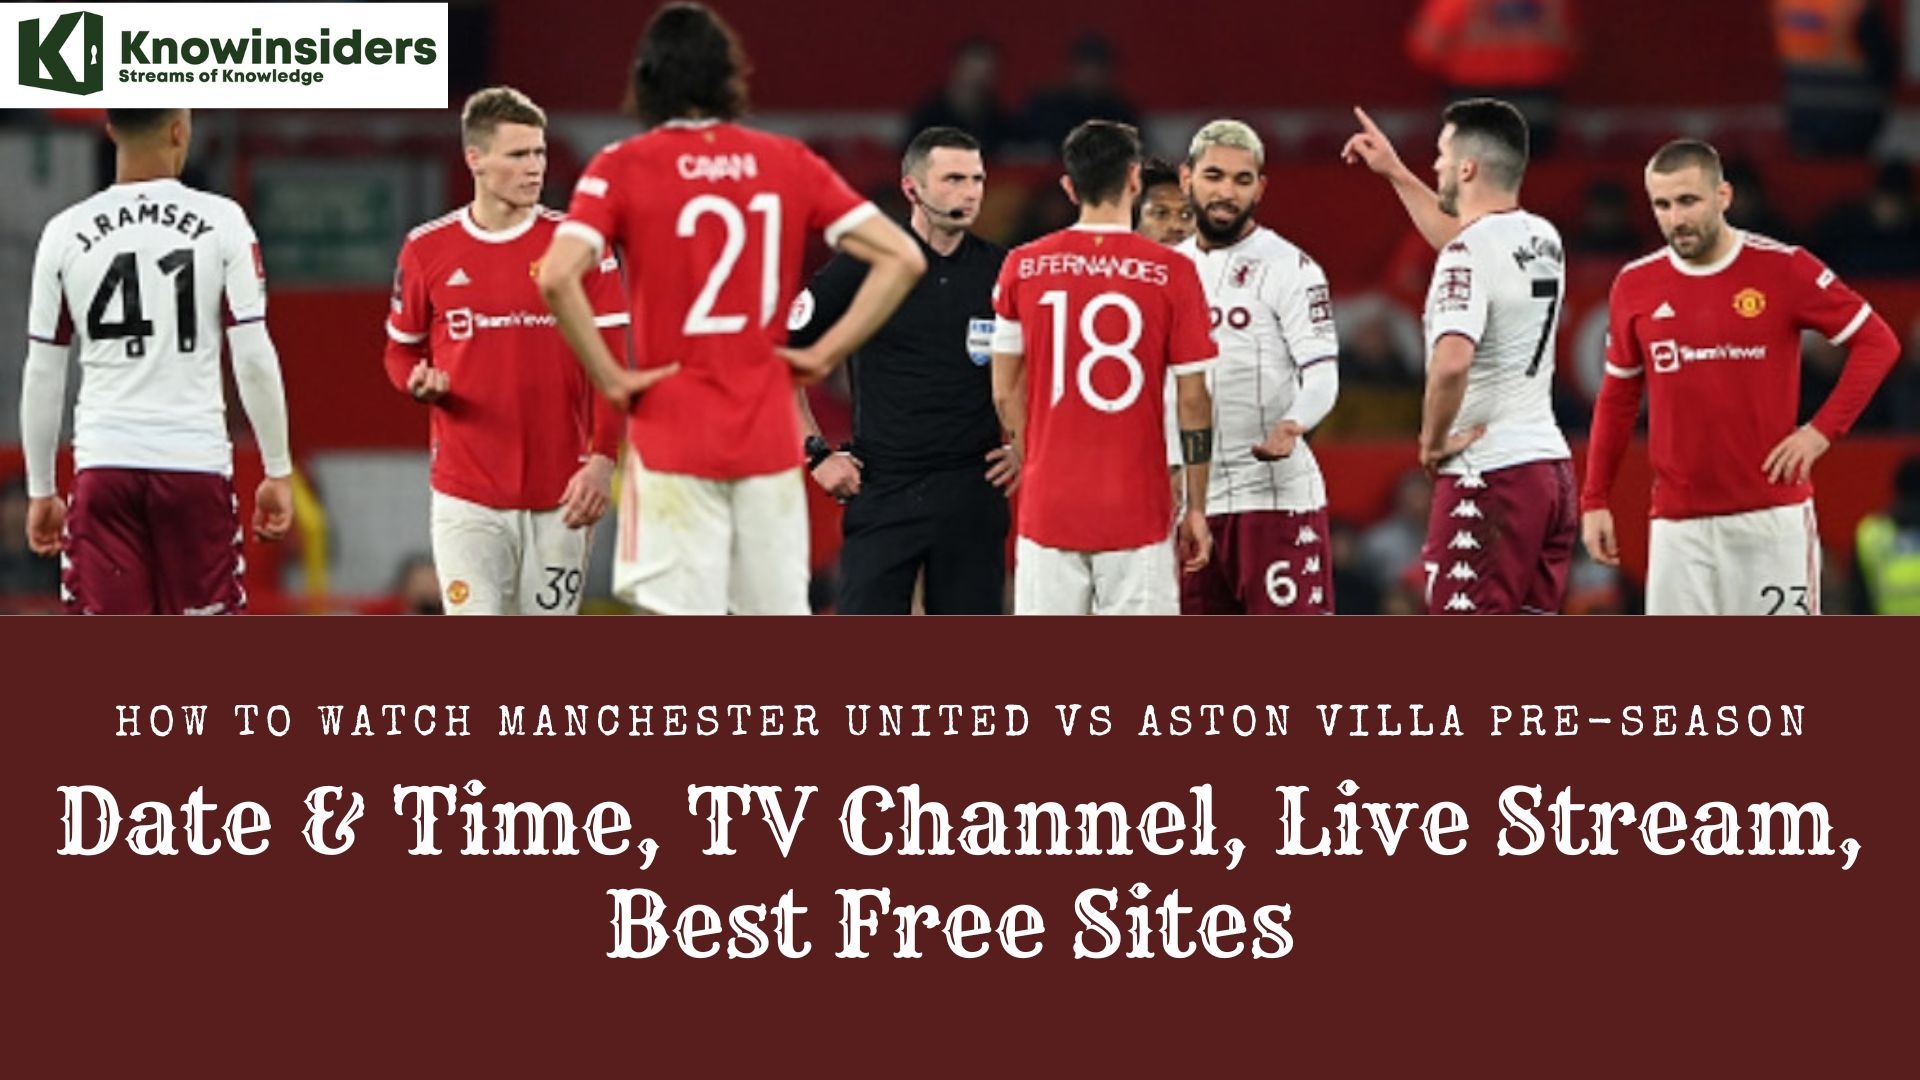 How To Watch Manchester United vs Aston Villa Pre-Season: Date & Time, TV Channel, Live Stream, Best Free Sites Knowinsiders.com 